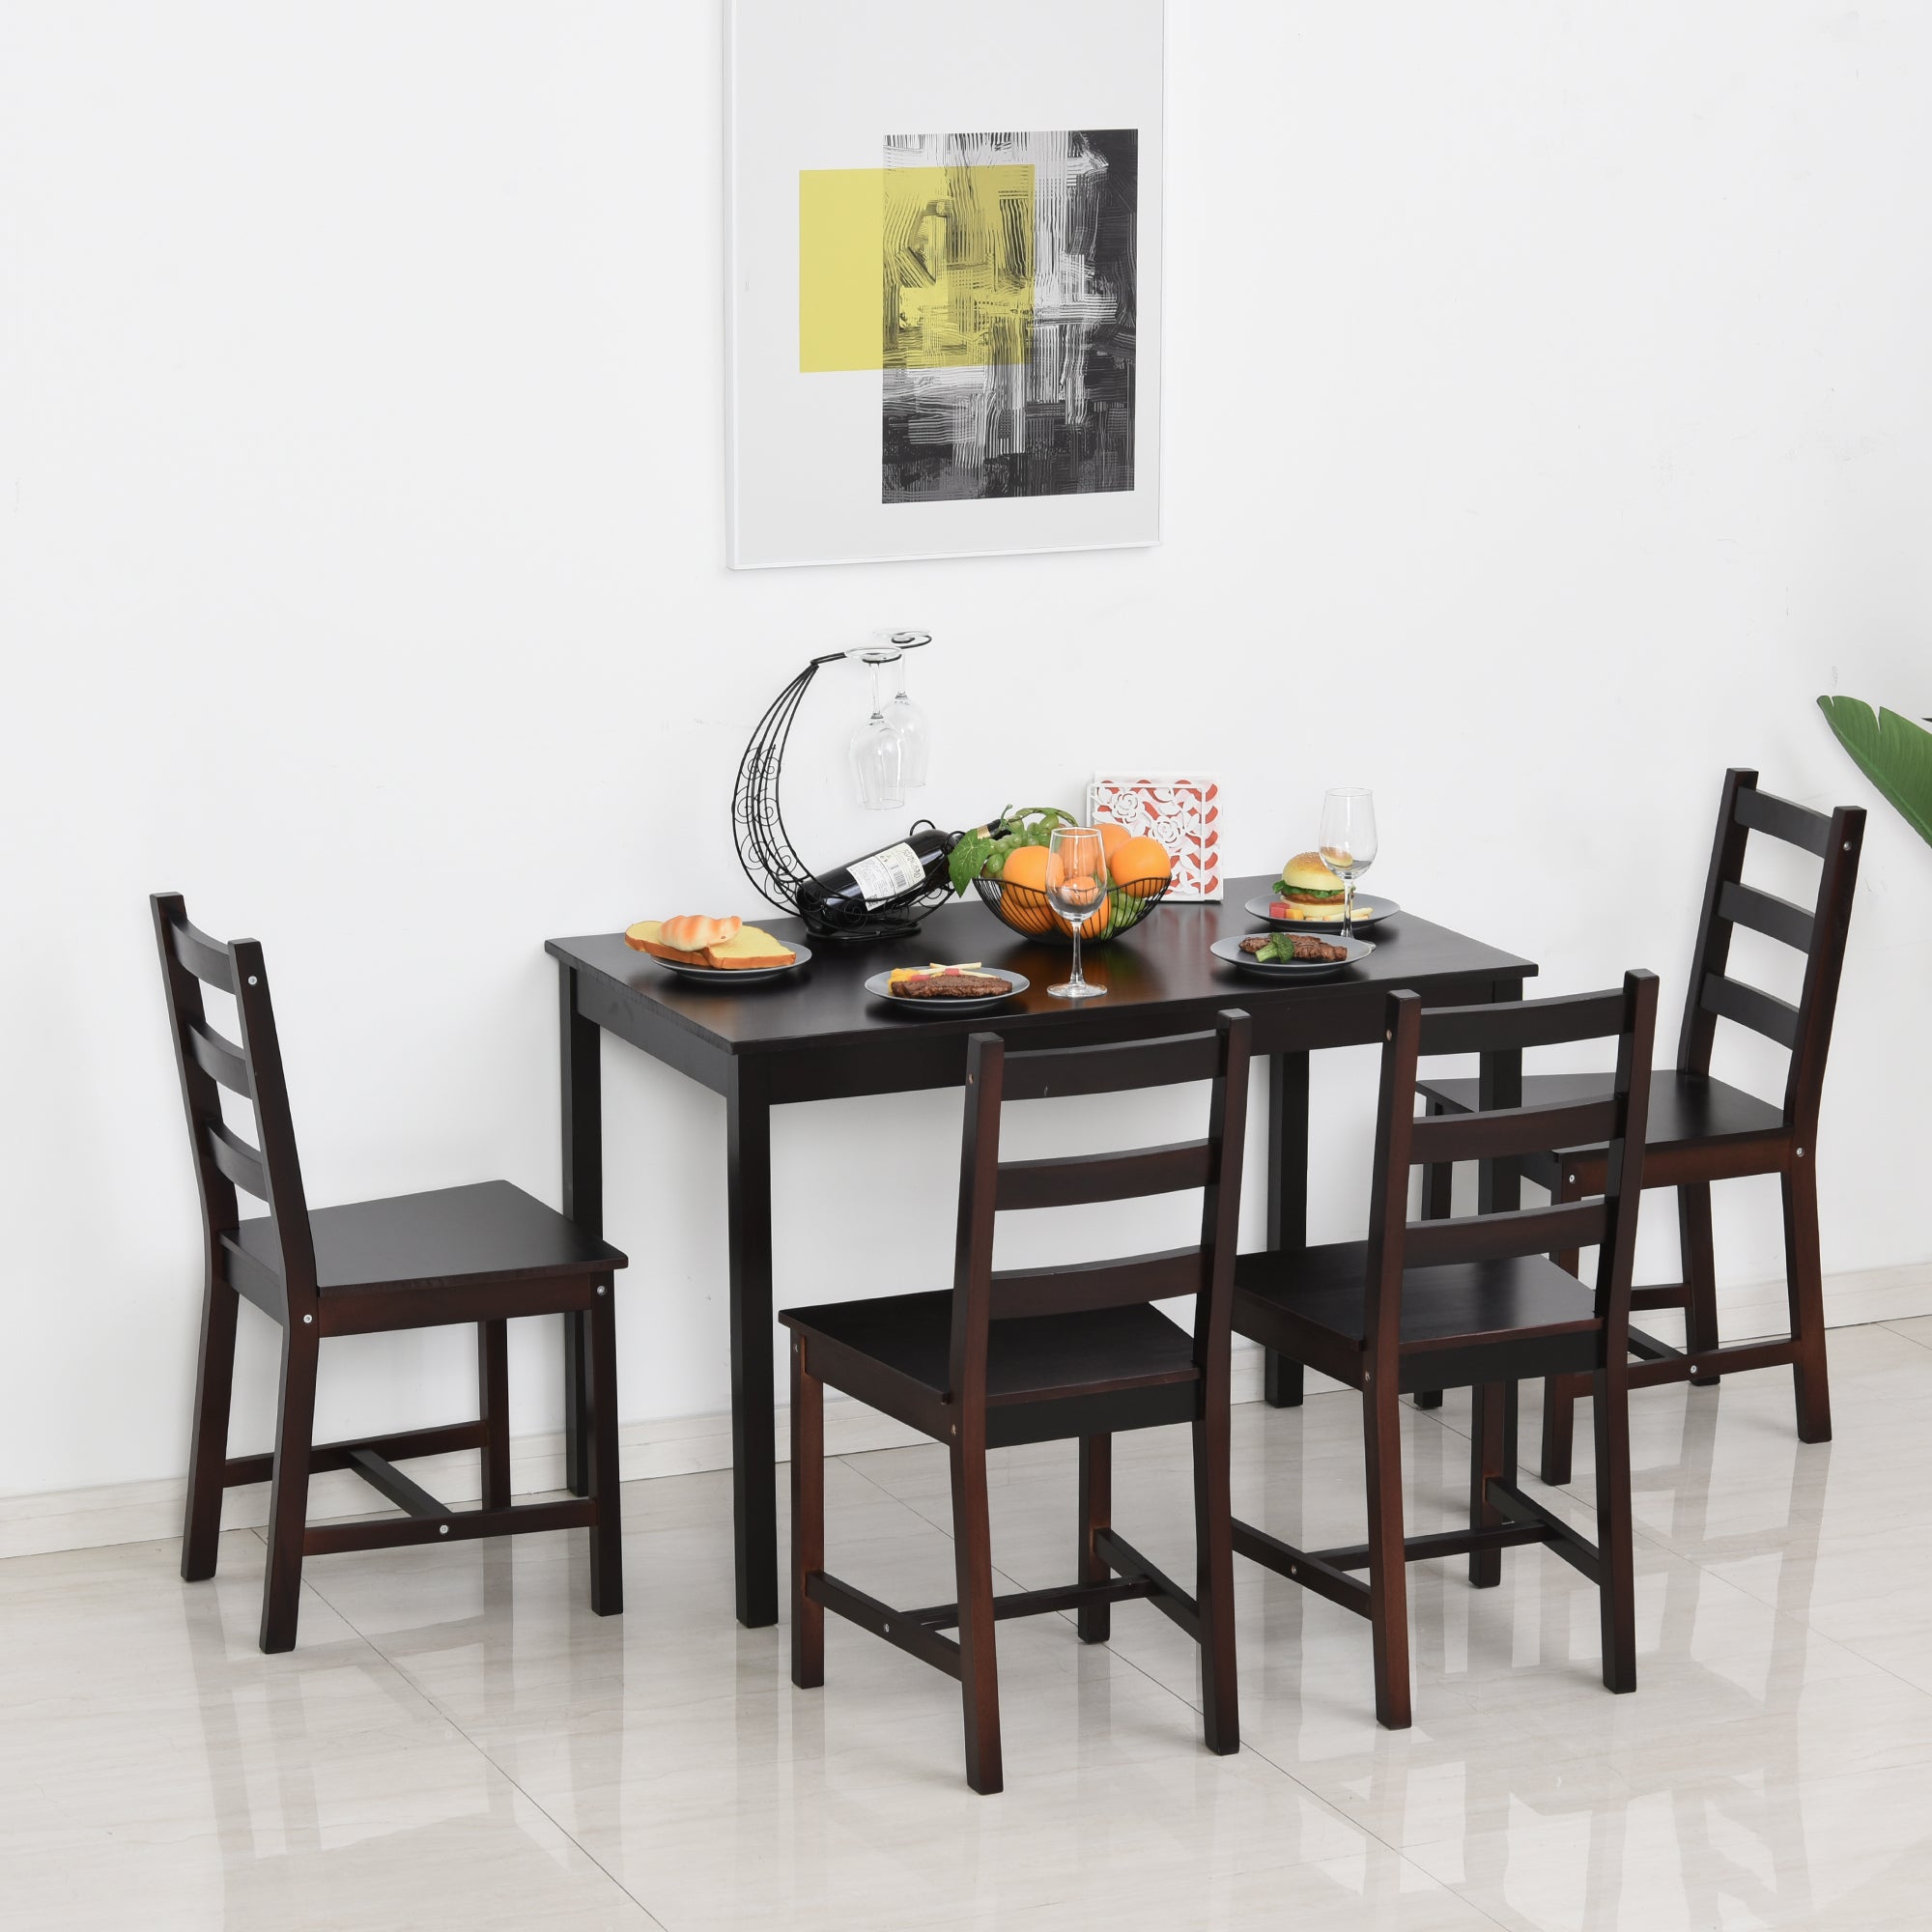 HOMCOM 5 Piece Dining Room Table Set, Wooden Kitchen brown-wood